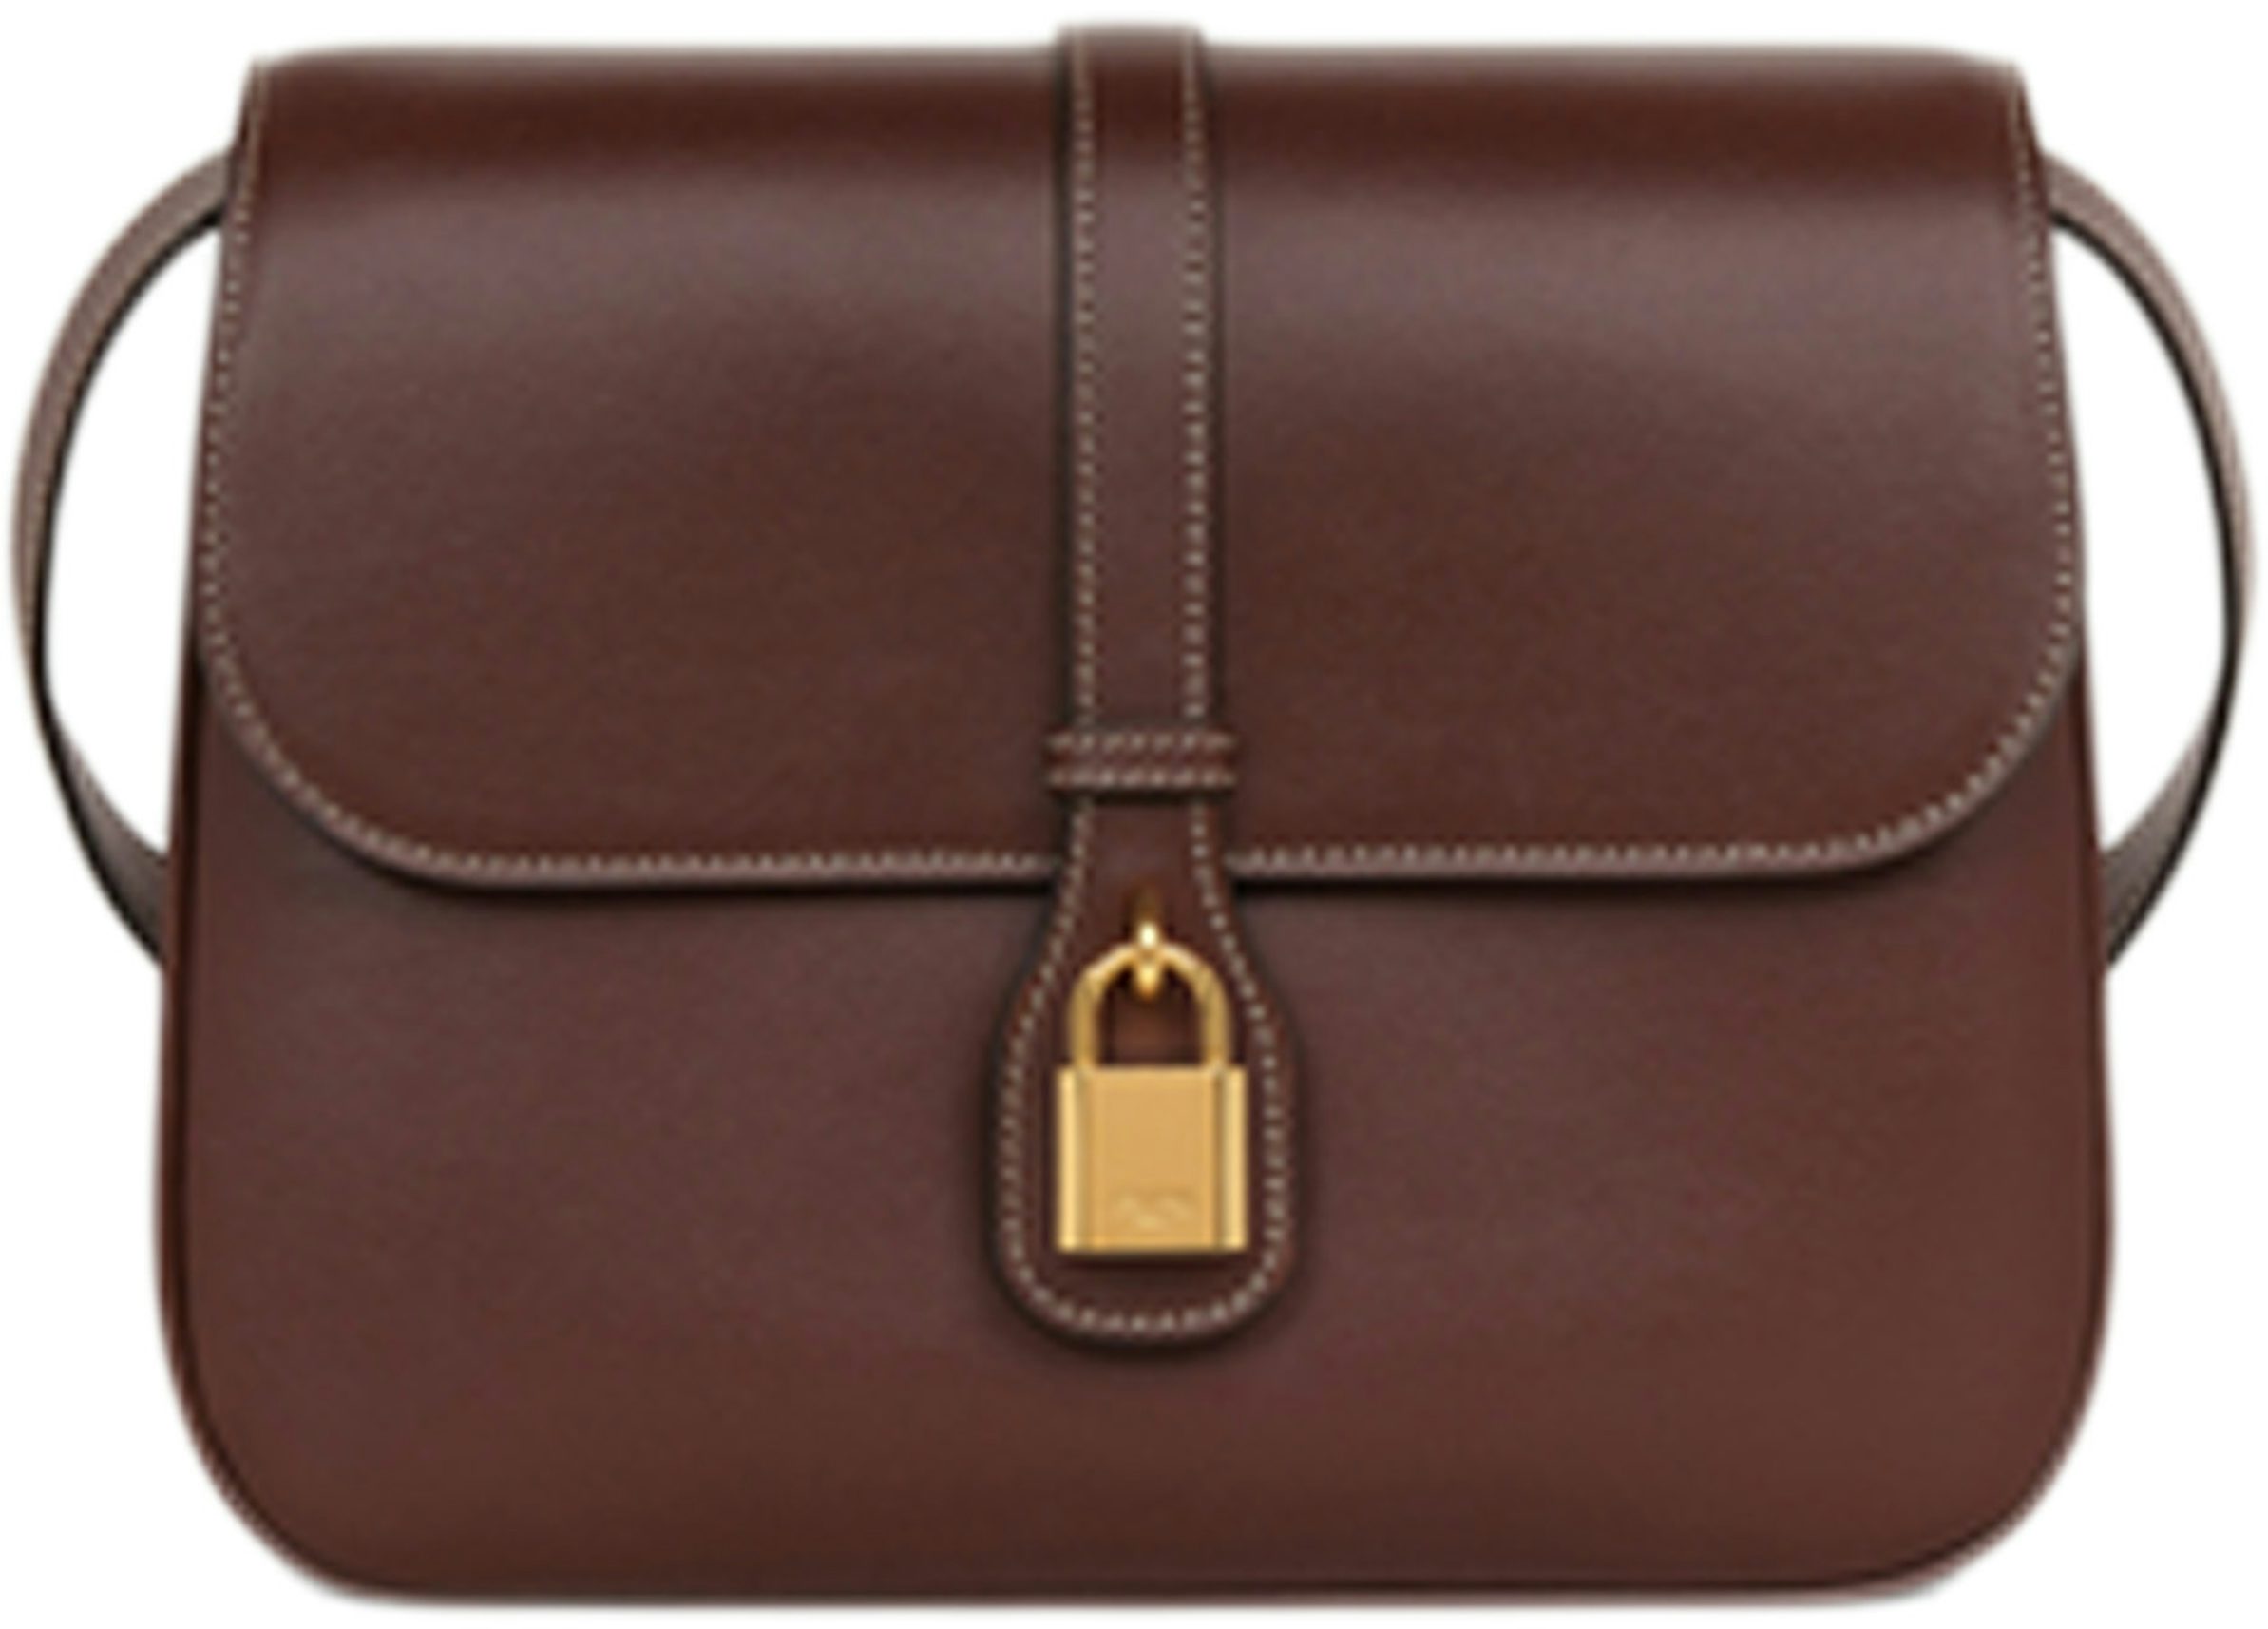 Celine Has A Different Kind Of Flap Bag In The Medium Tabou